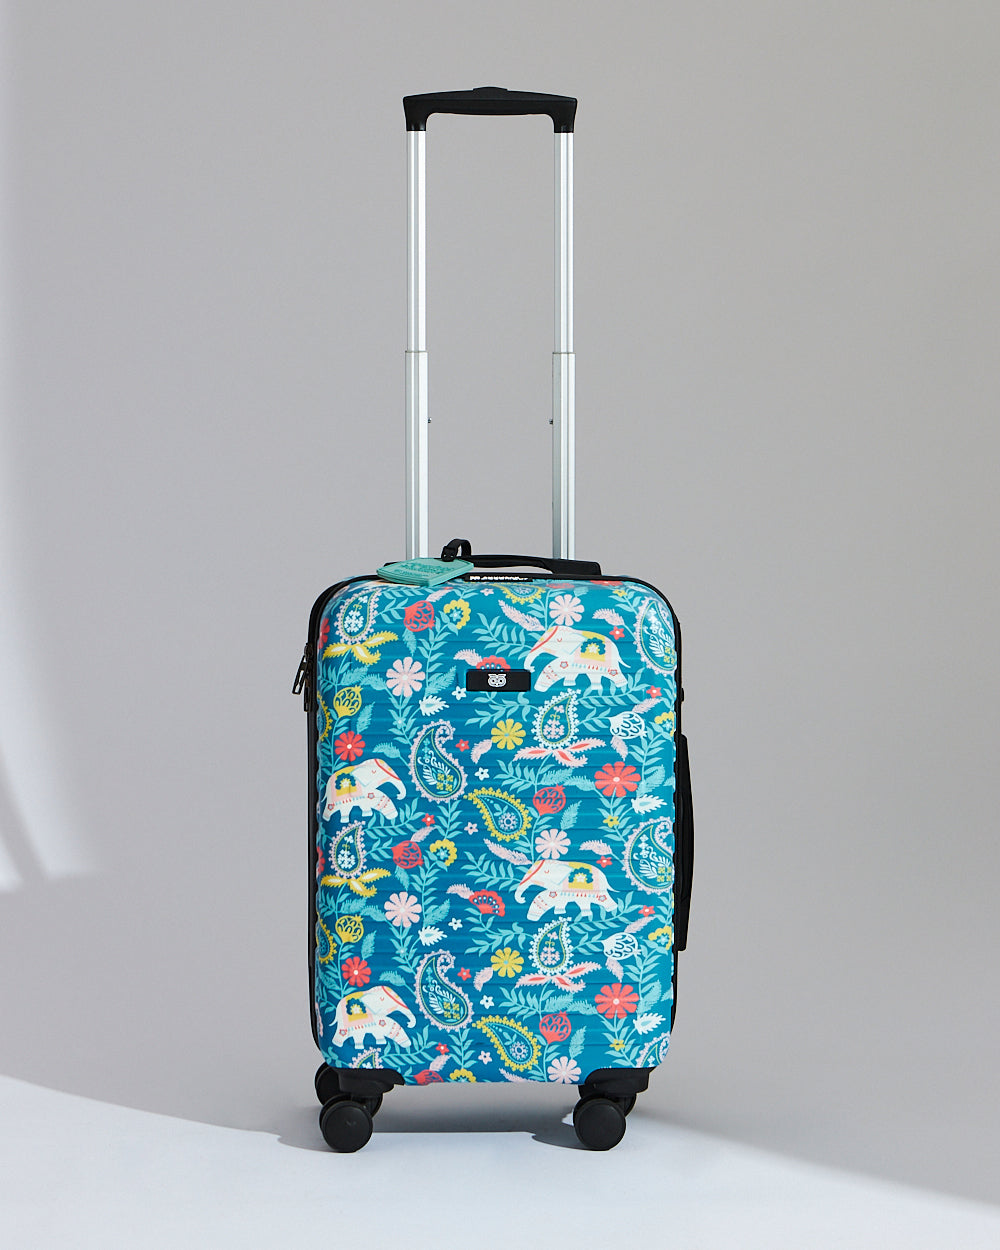 Paisley Tusker Luggage, 20"| Chumbak for Assembly